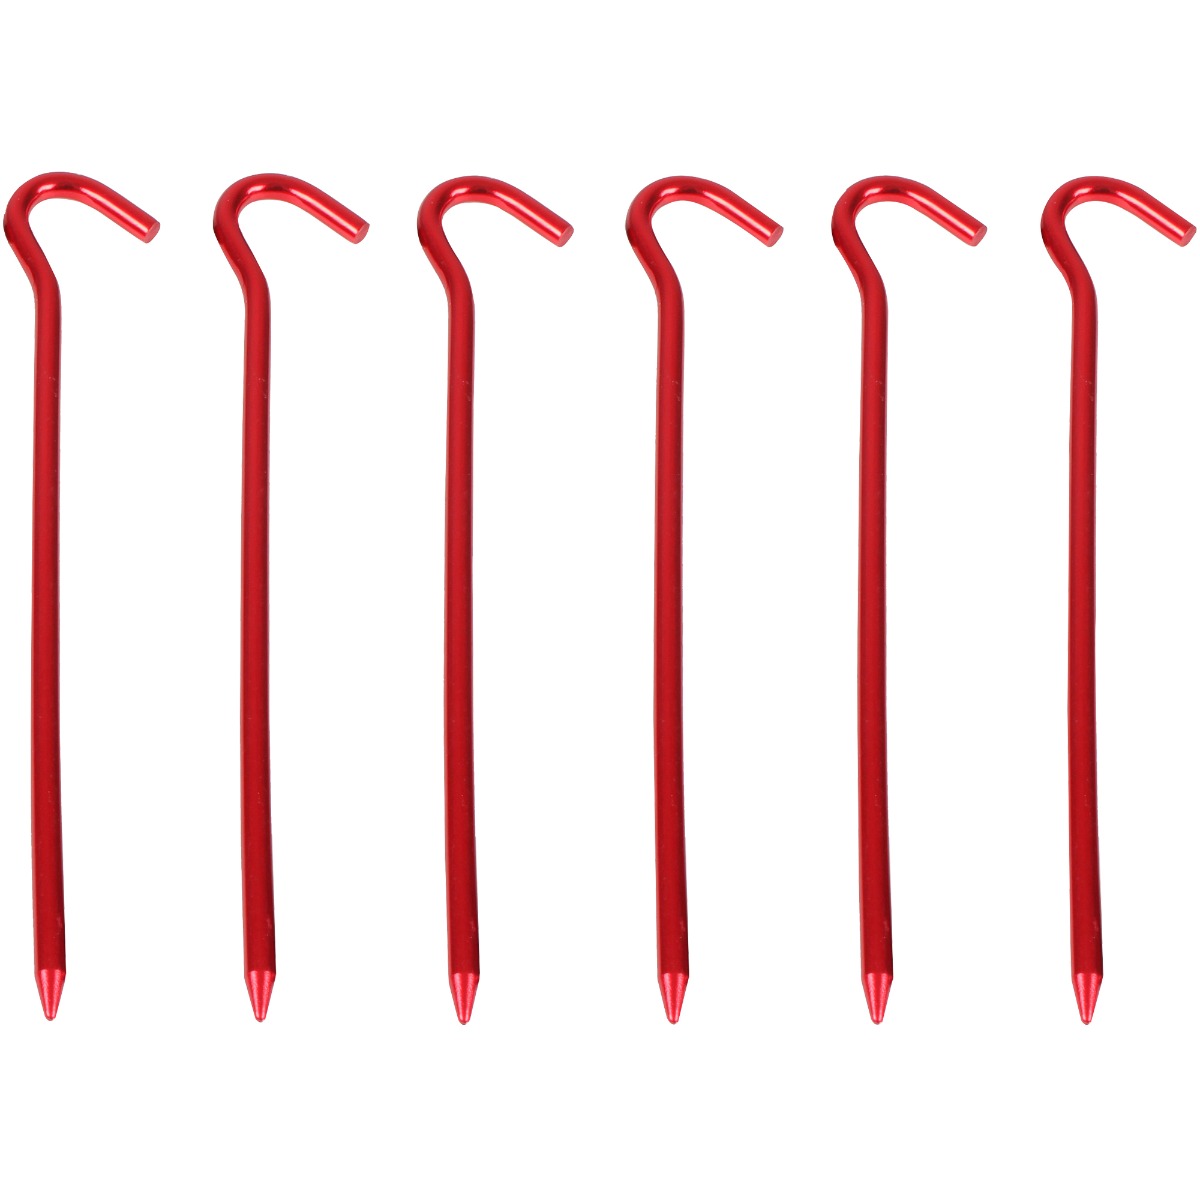 6 PACK 18CM TENT PEGS